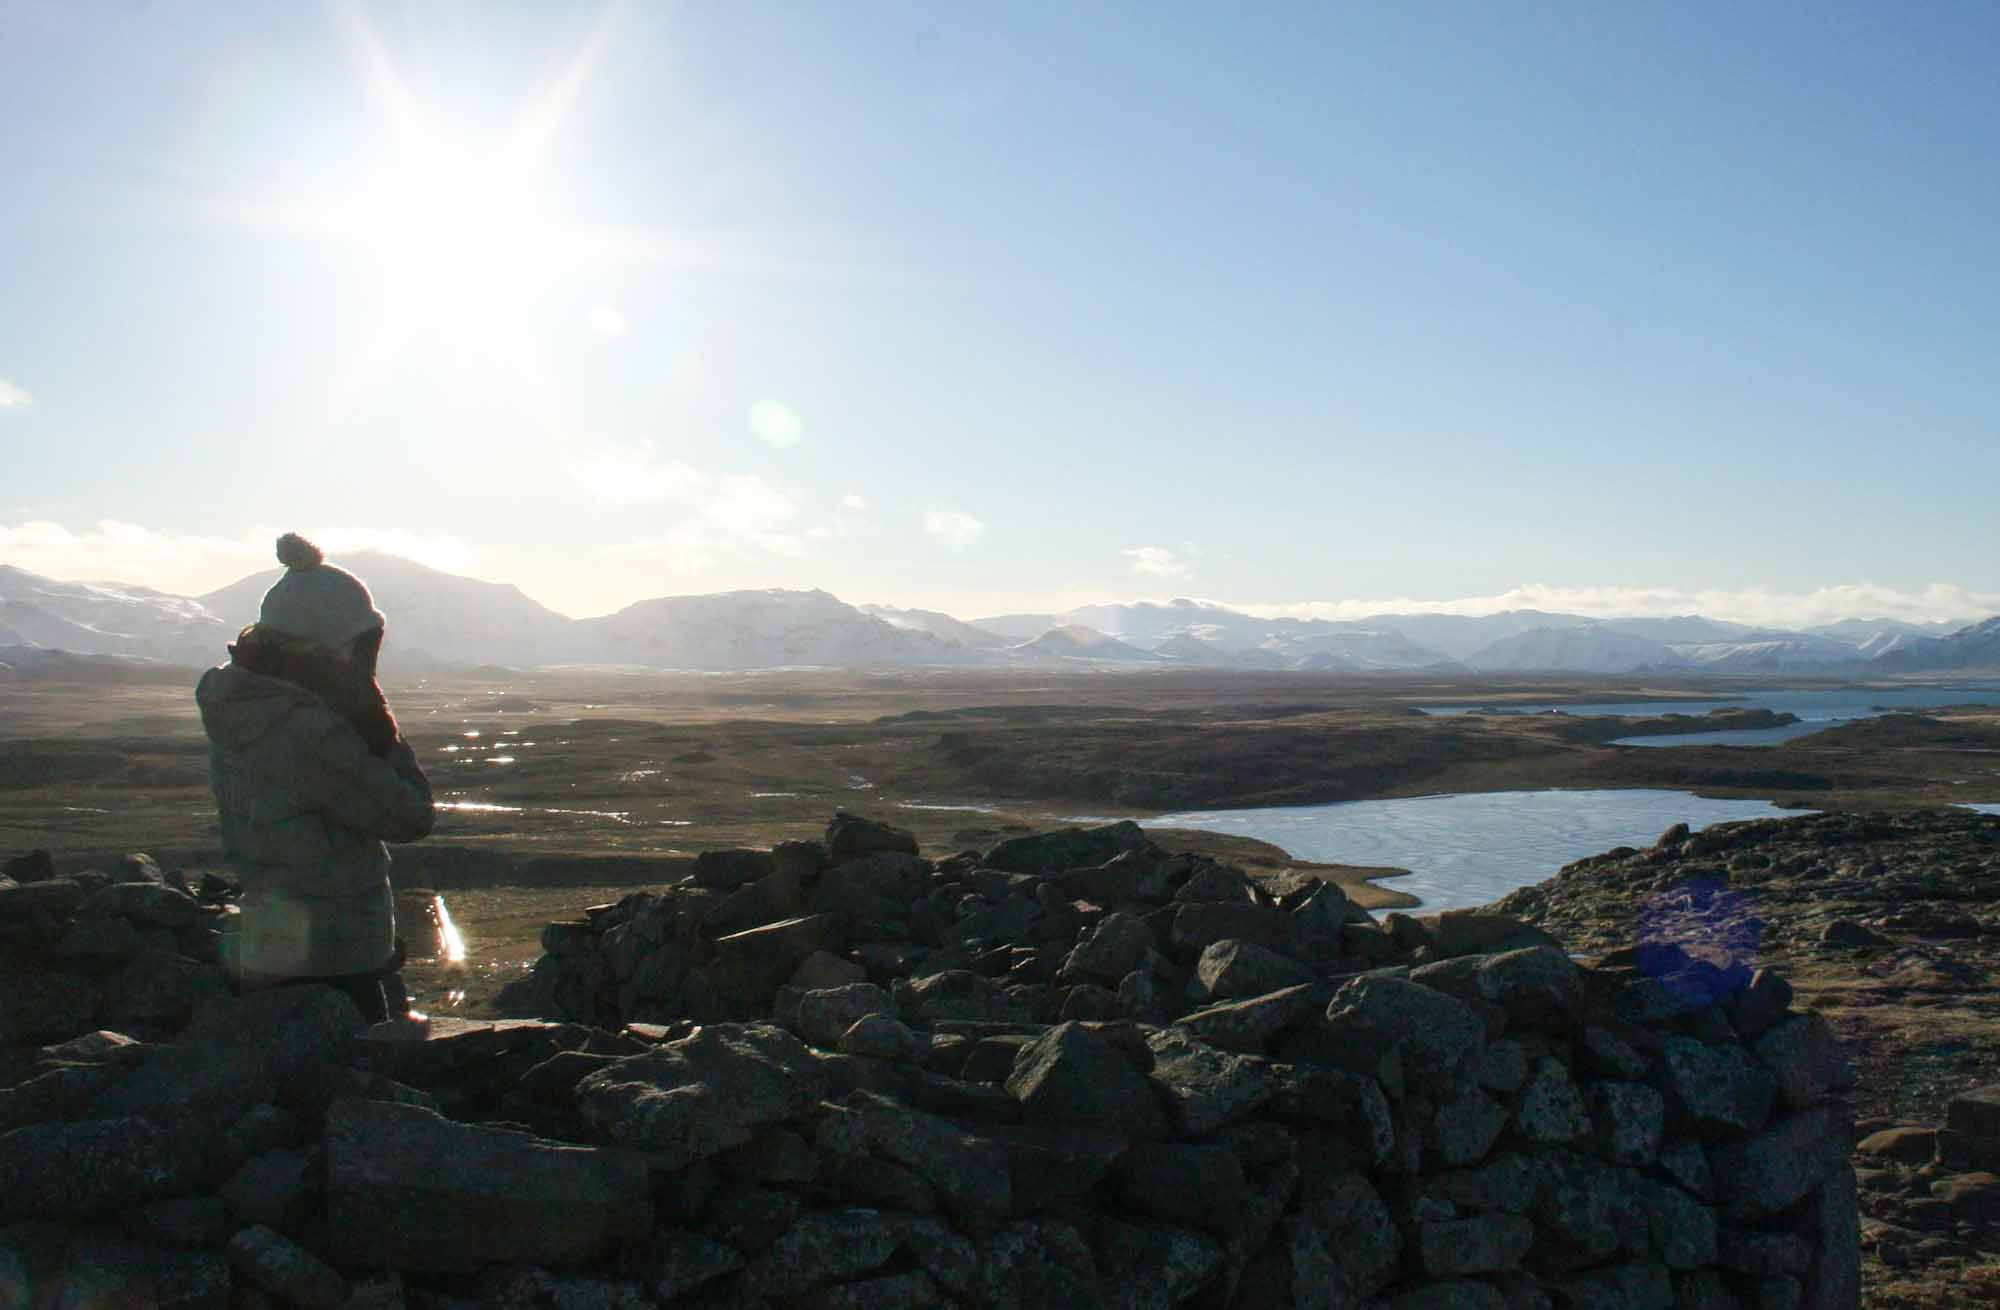 Lady stood at an expansive viewpoint of lakes and mountains in Iceland